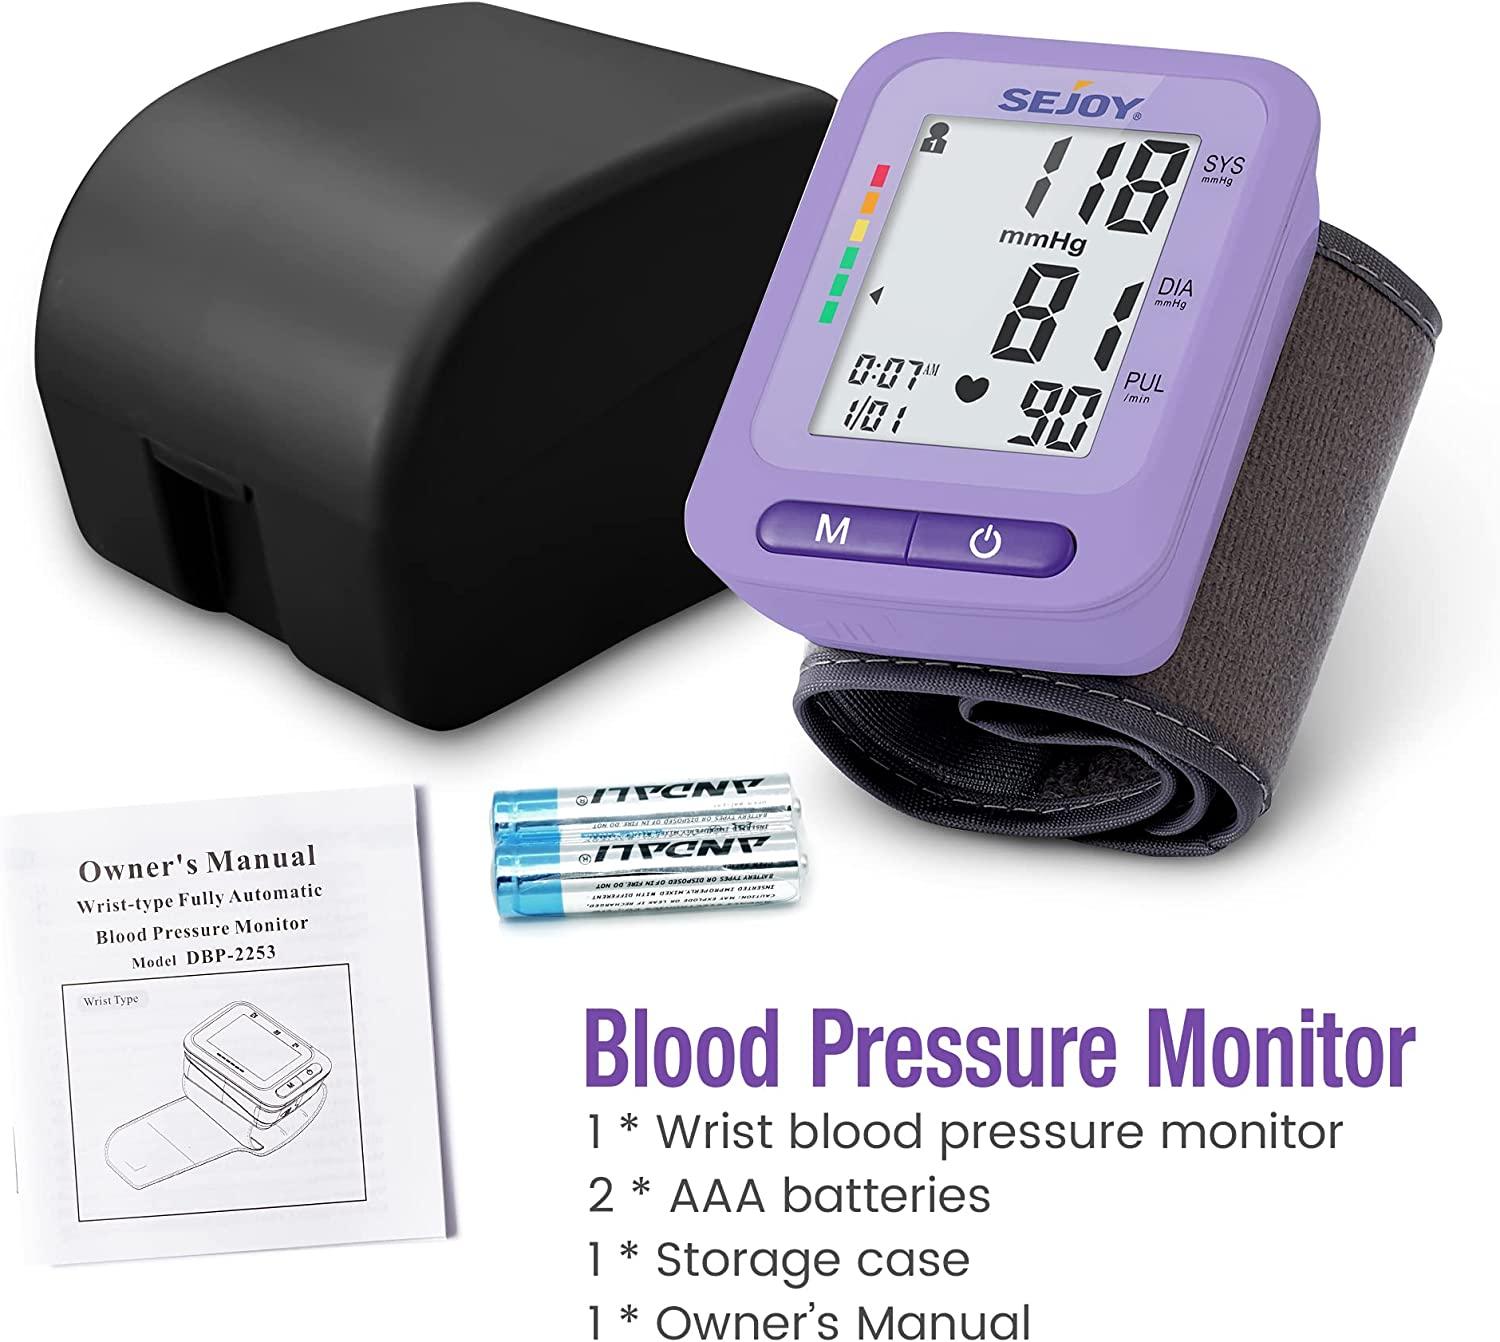 Sejoy Blood Pressure Monitor Wrist with Large Cuff, Automatic Digital  Portable BP Machine with Heart Rate Detection,LCD Display,for Home Travel